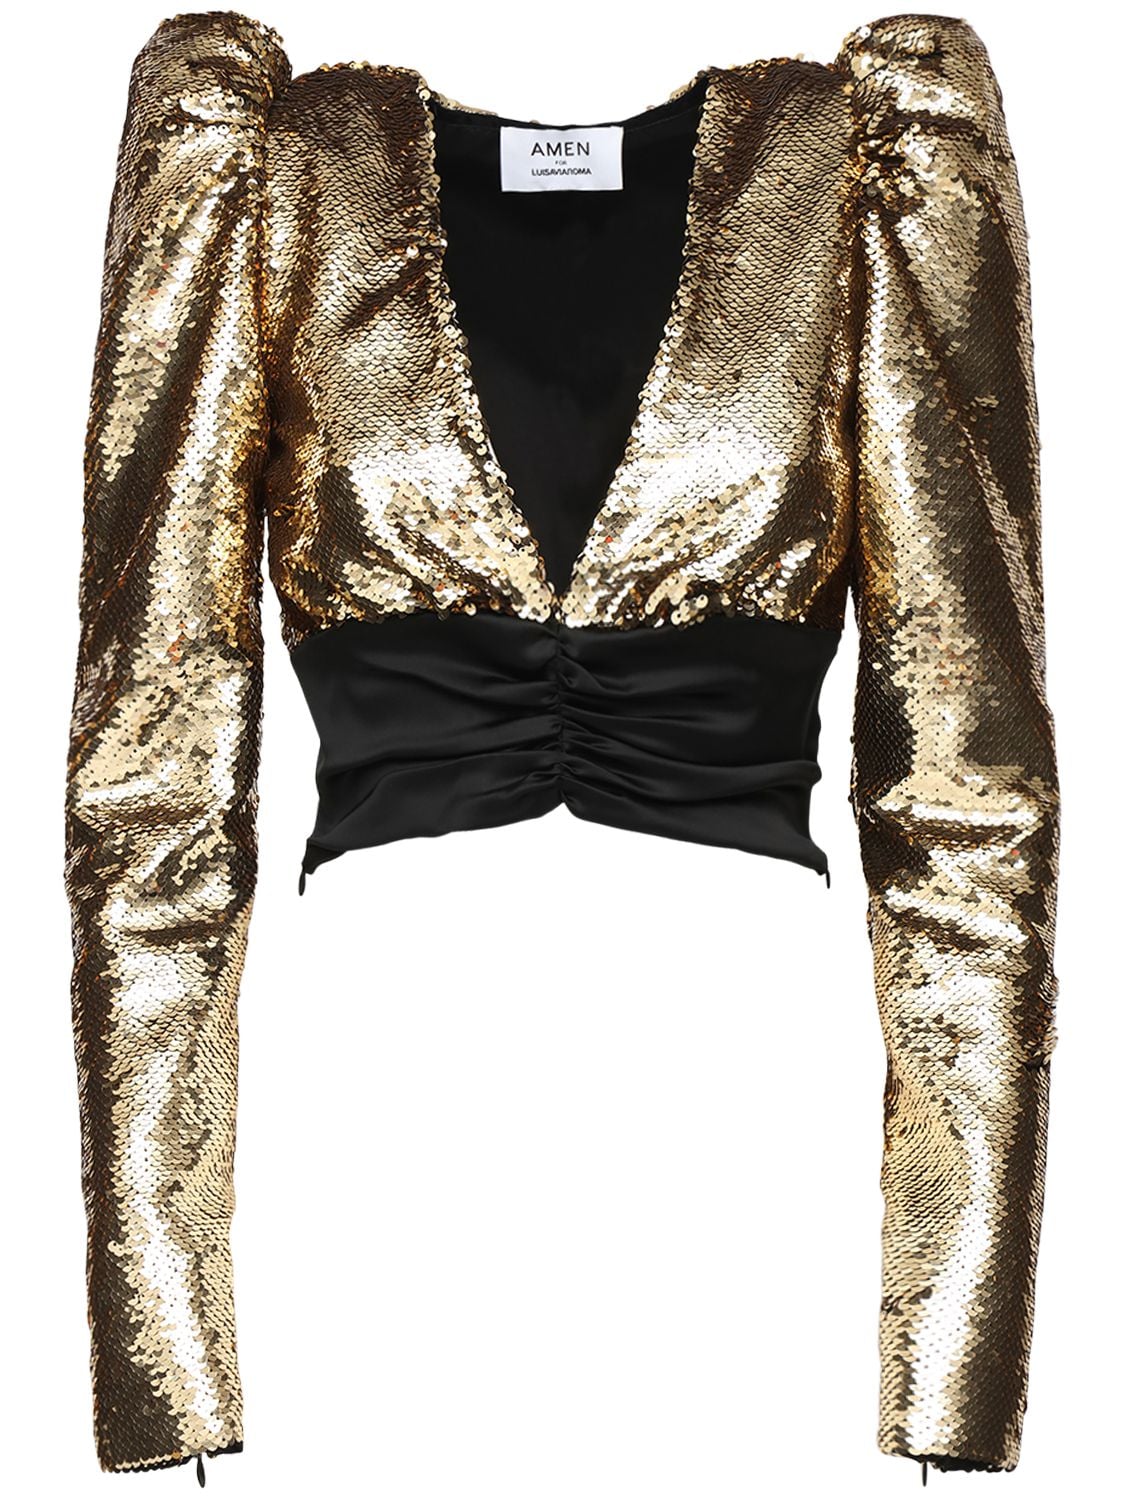 AMEN Puff Sleeves Sequined Satin Top